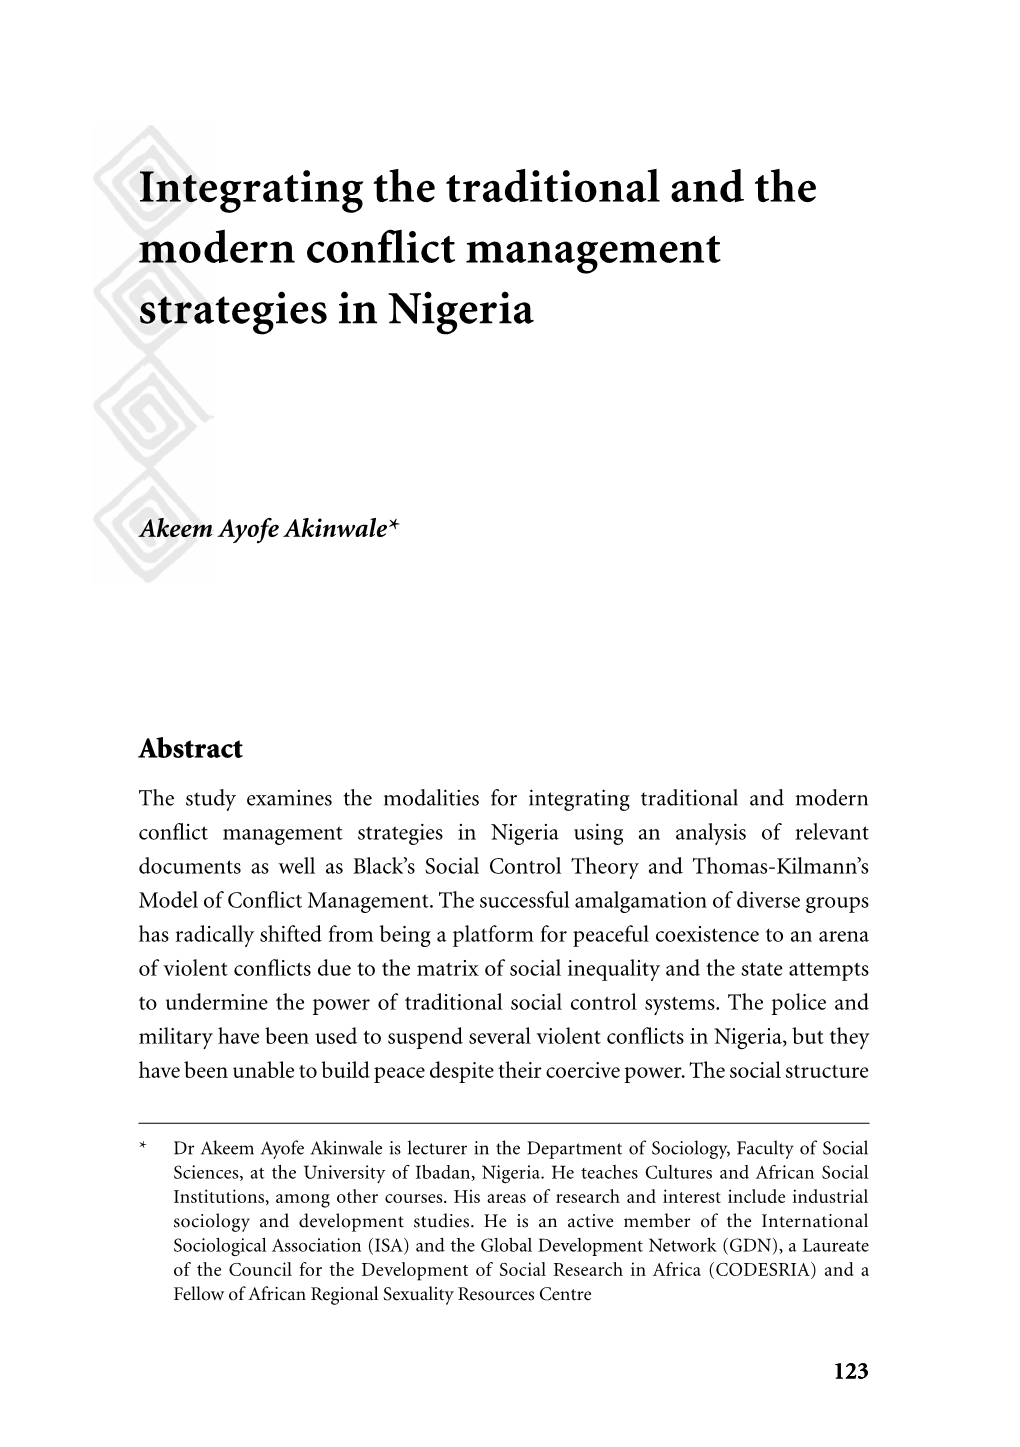 Integrating the Traditional and the Modern Conflict Management Strategies in Nigeria